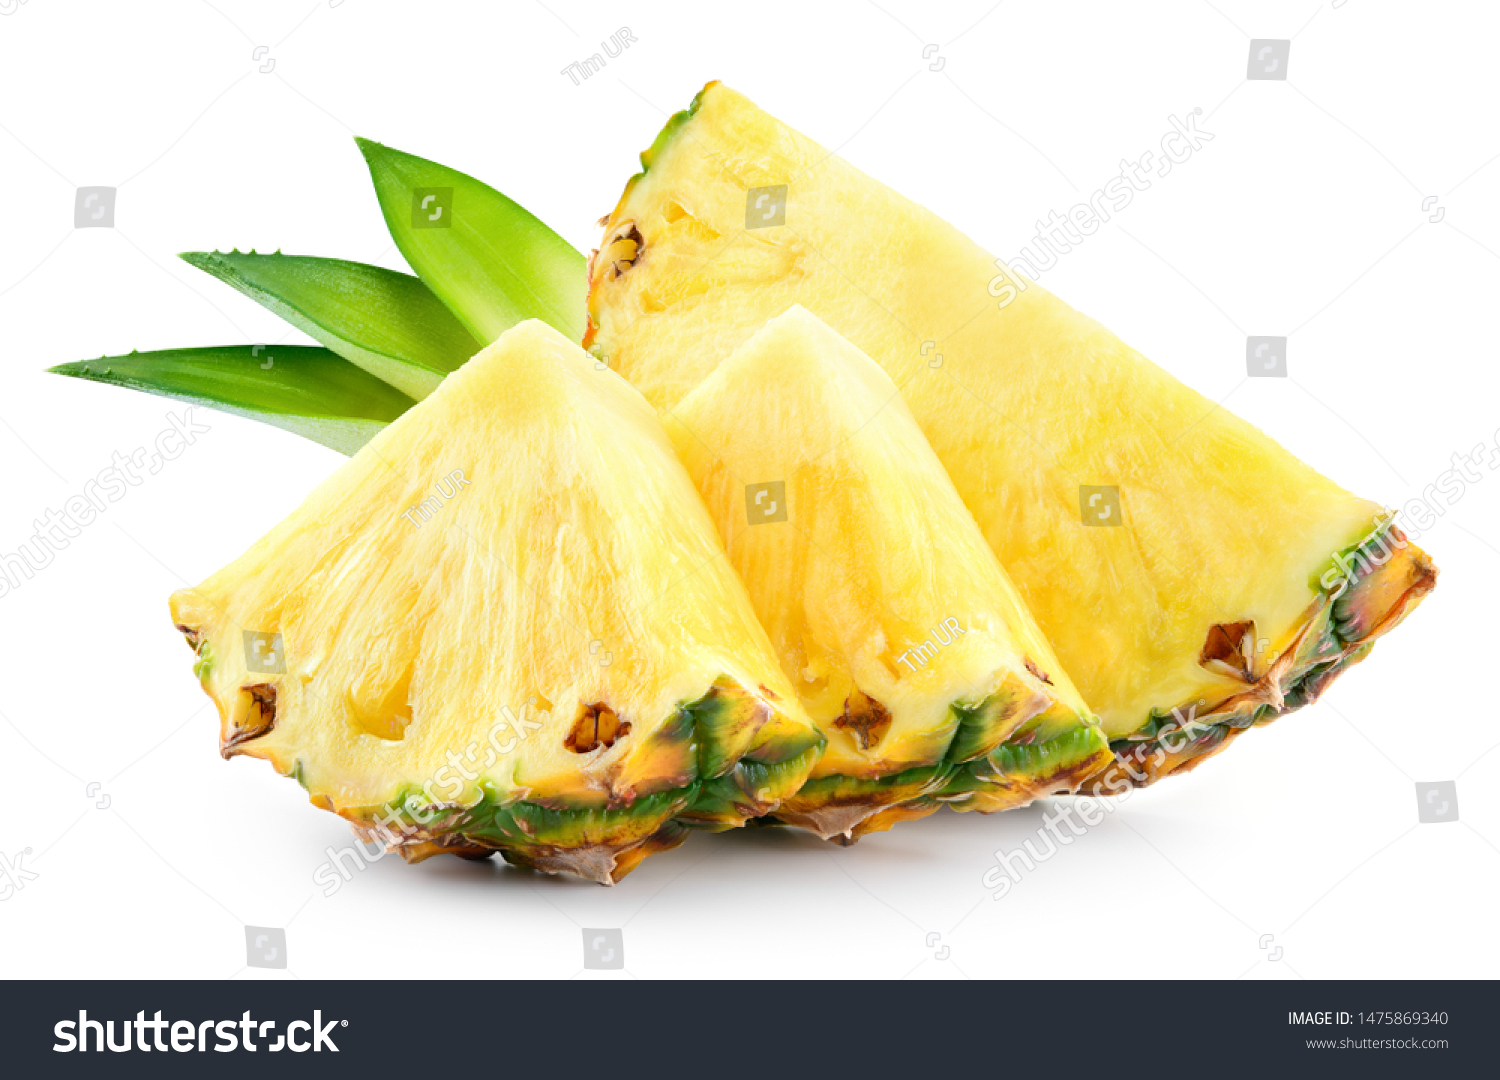 Pineapple slices with leaves. Pineapple isolate. Cut pineapple on white. #1475869340